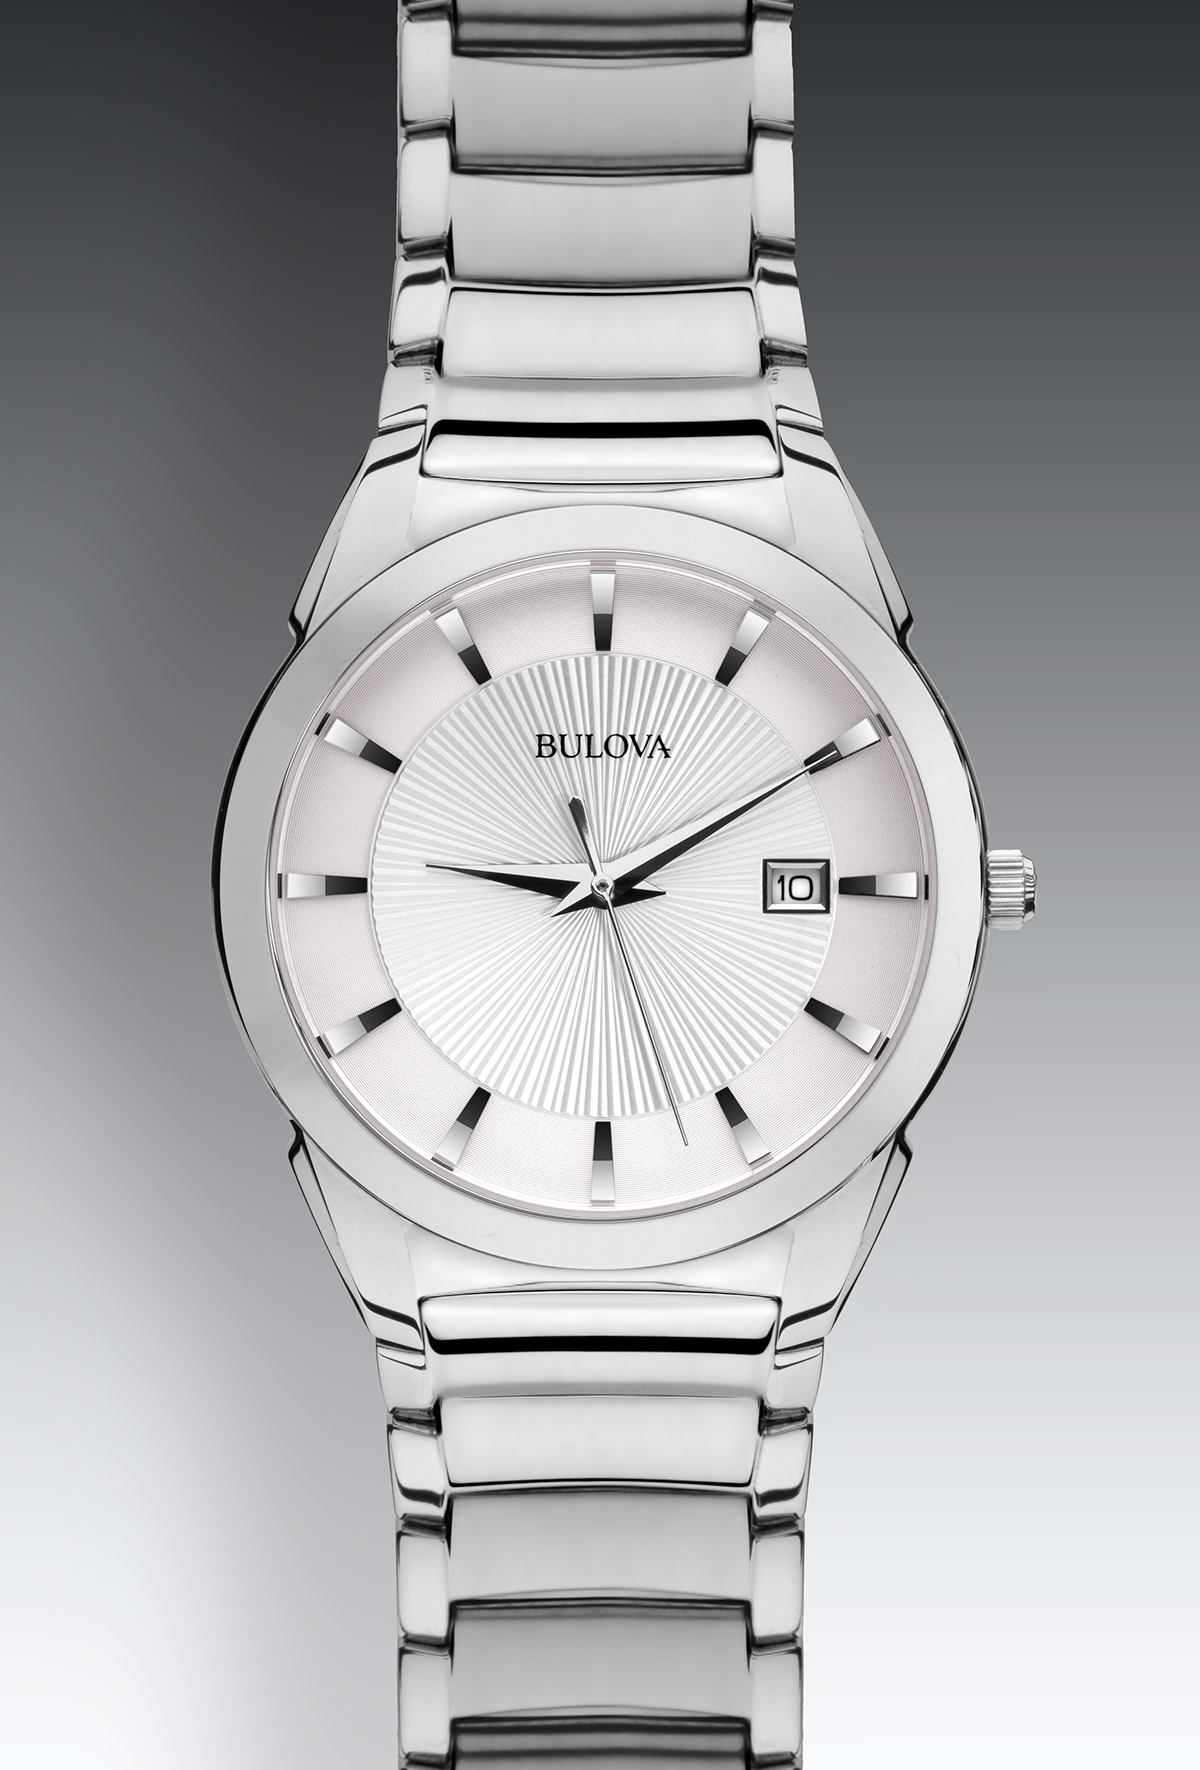 watch Bulova jewelry Product Photography product Los Angeles photographer Commercial photographer Commercial Photography